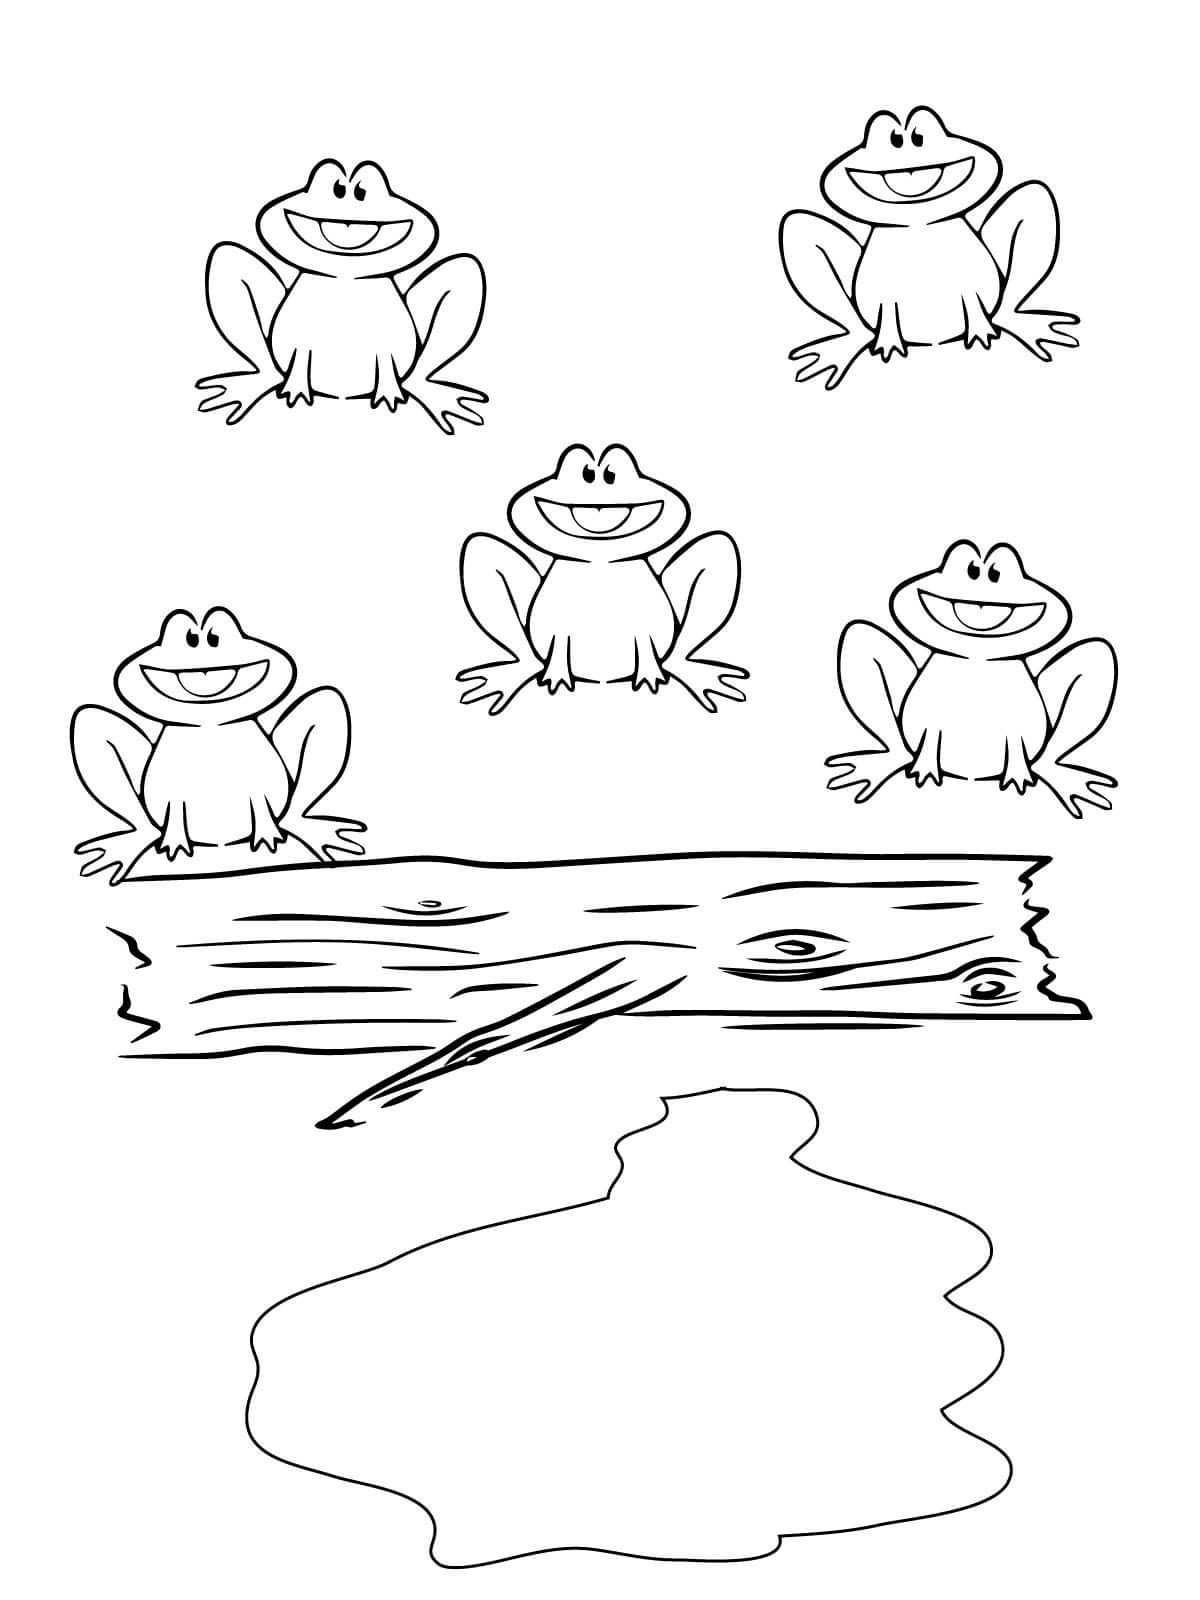 Little Baby Bum Coloring Pages
 Five Little Speckled Frogs coloring picture for kids